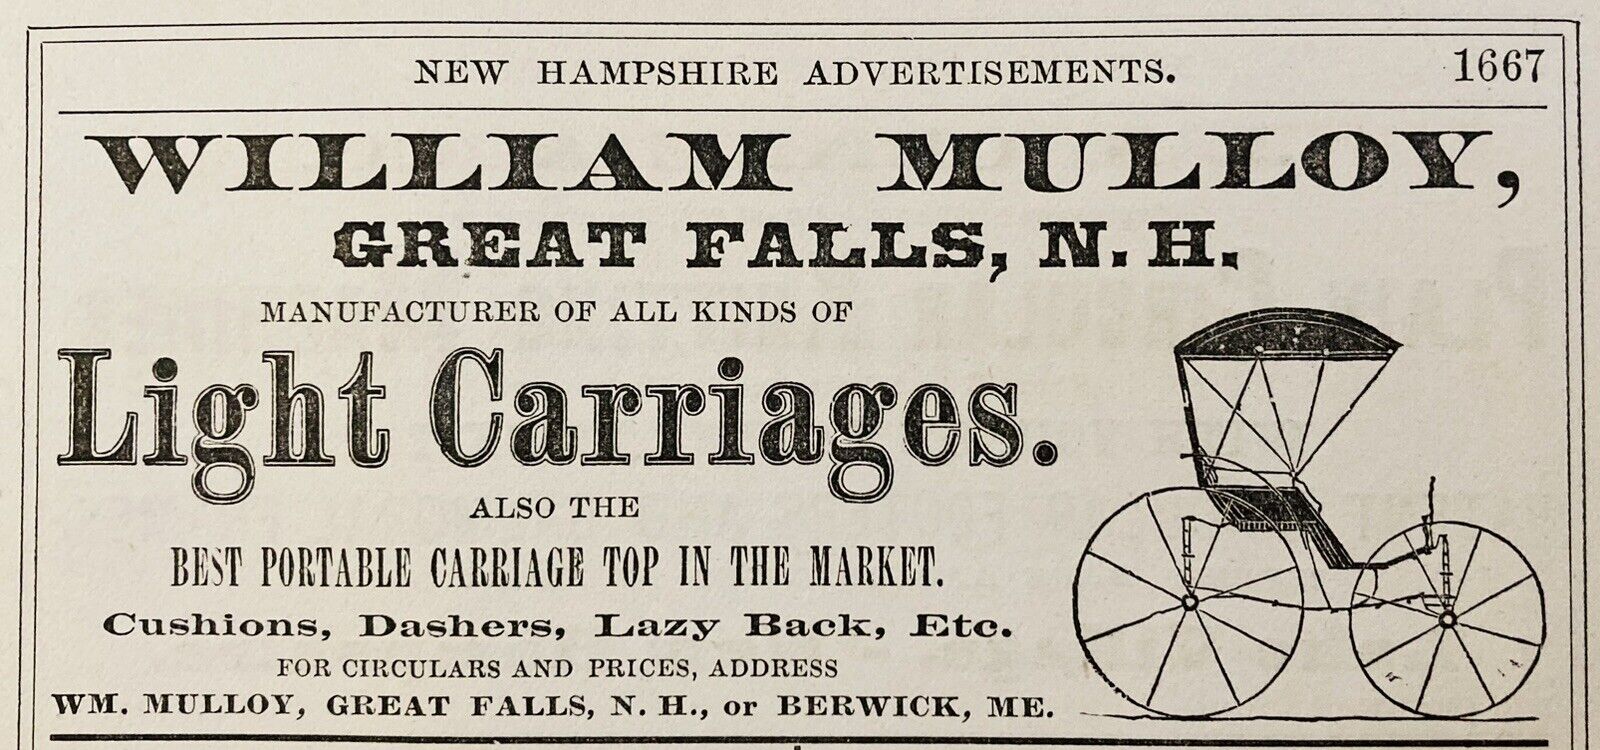 1883 AD(N18)~WILLIAM MULLOY CO. GREAT FALLS, NH. LIGHT CARRIAGES MFG. CO.